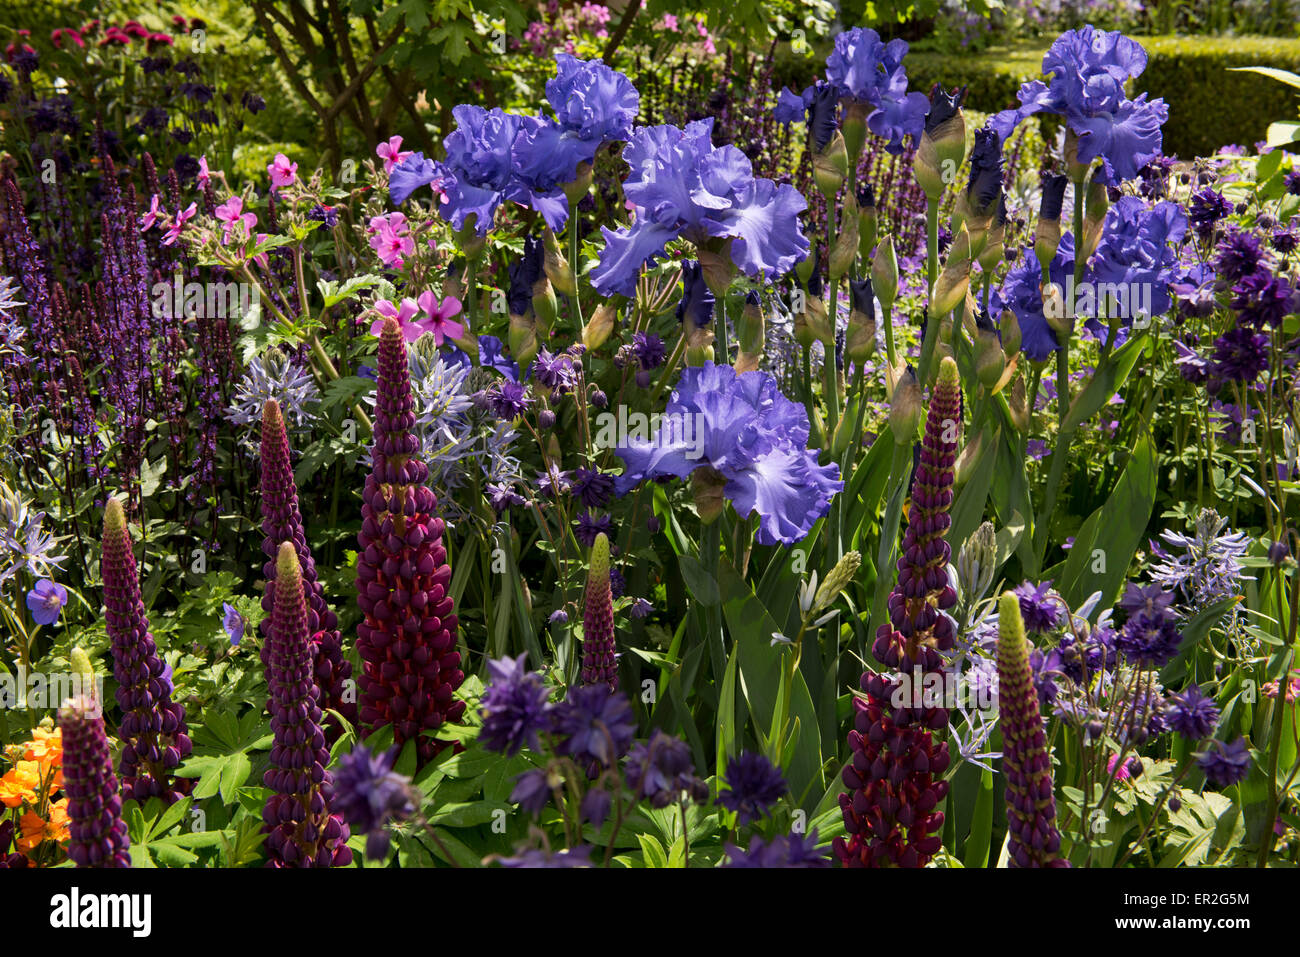 Lupinus 'Masterpiece' and Iris 'Mer du Sud' in The Morgan Stanley Healthy Cities Garden at The Chelsea Flower Show, 2015. Stock Photo